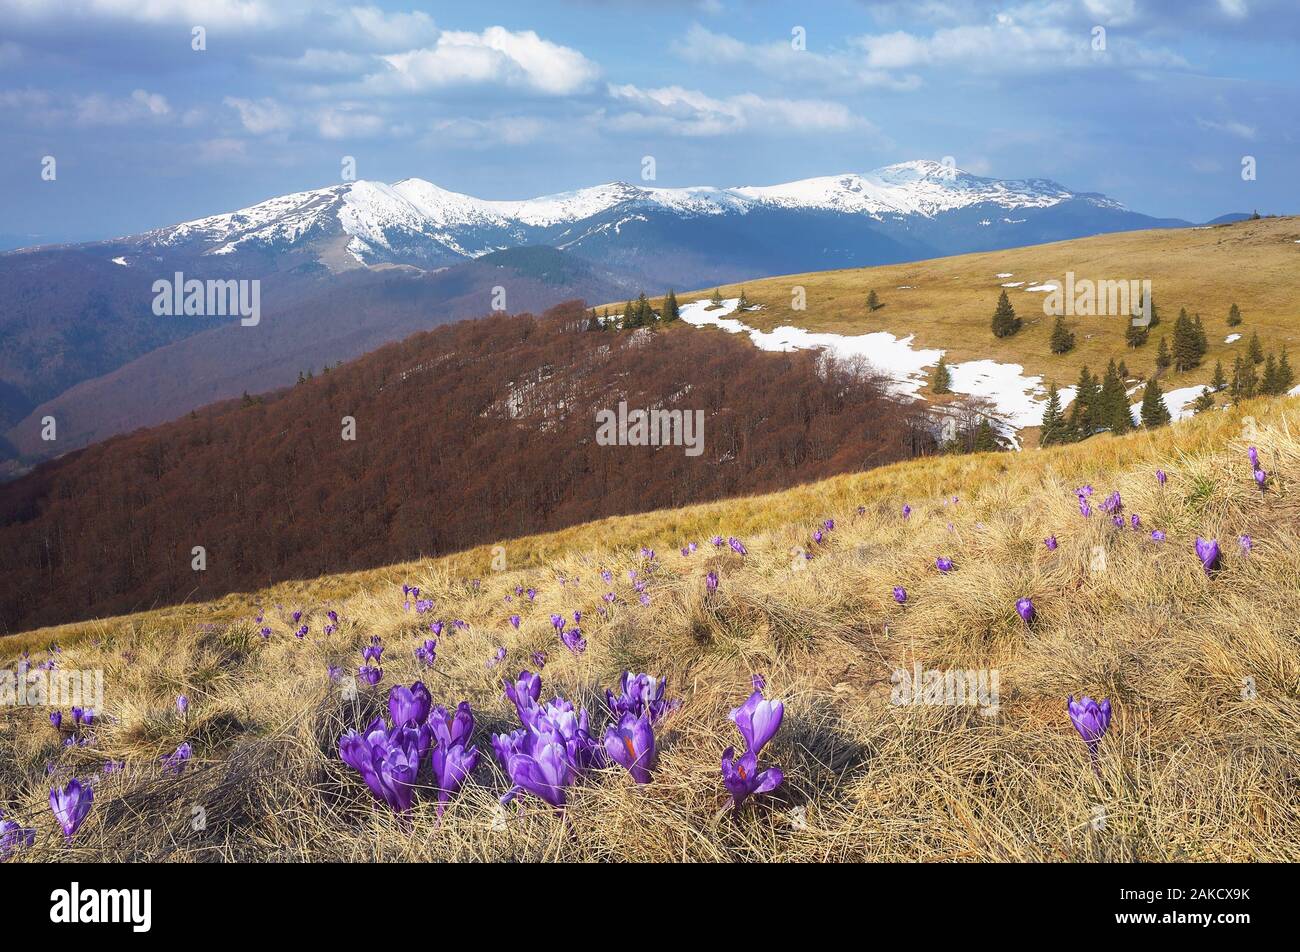 Mountain Landscape With Flowers Of Crocus Early Spring In The